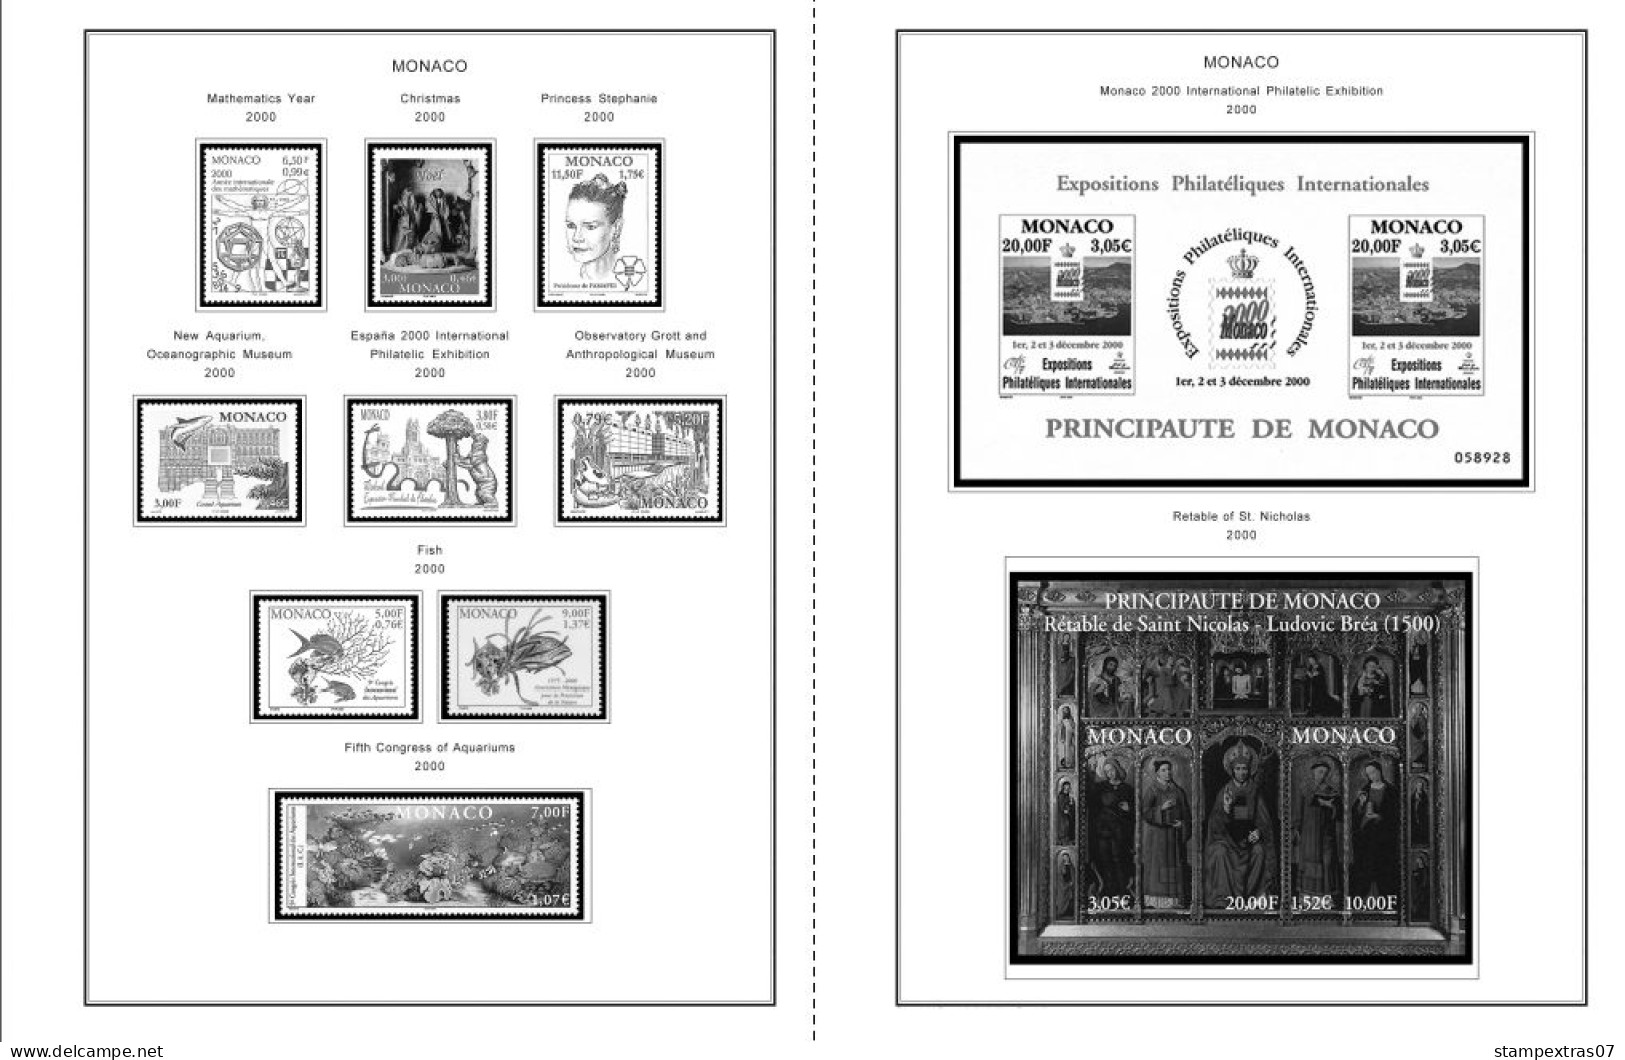 MONACO 1855-2010 + 2011-2020 STAMP ALBUM PAGES (409 B&w Illustrated Pages) - Anglais